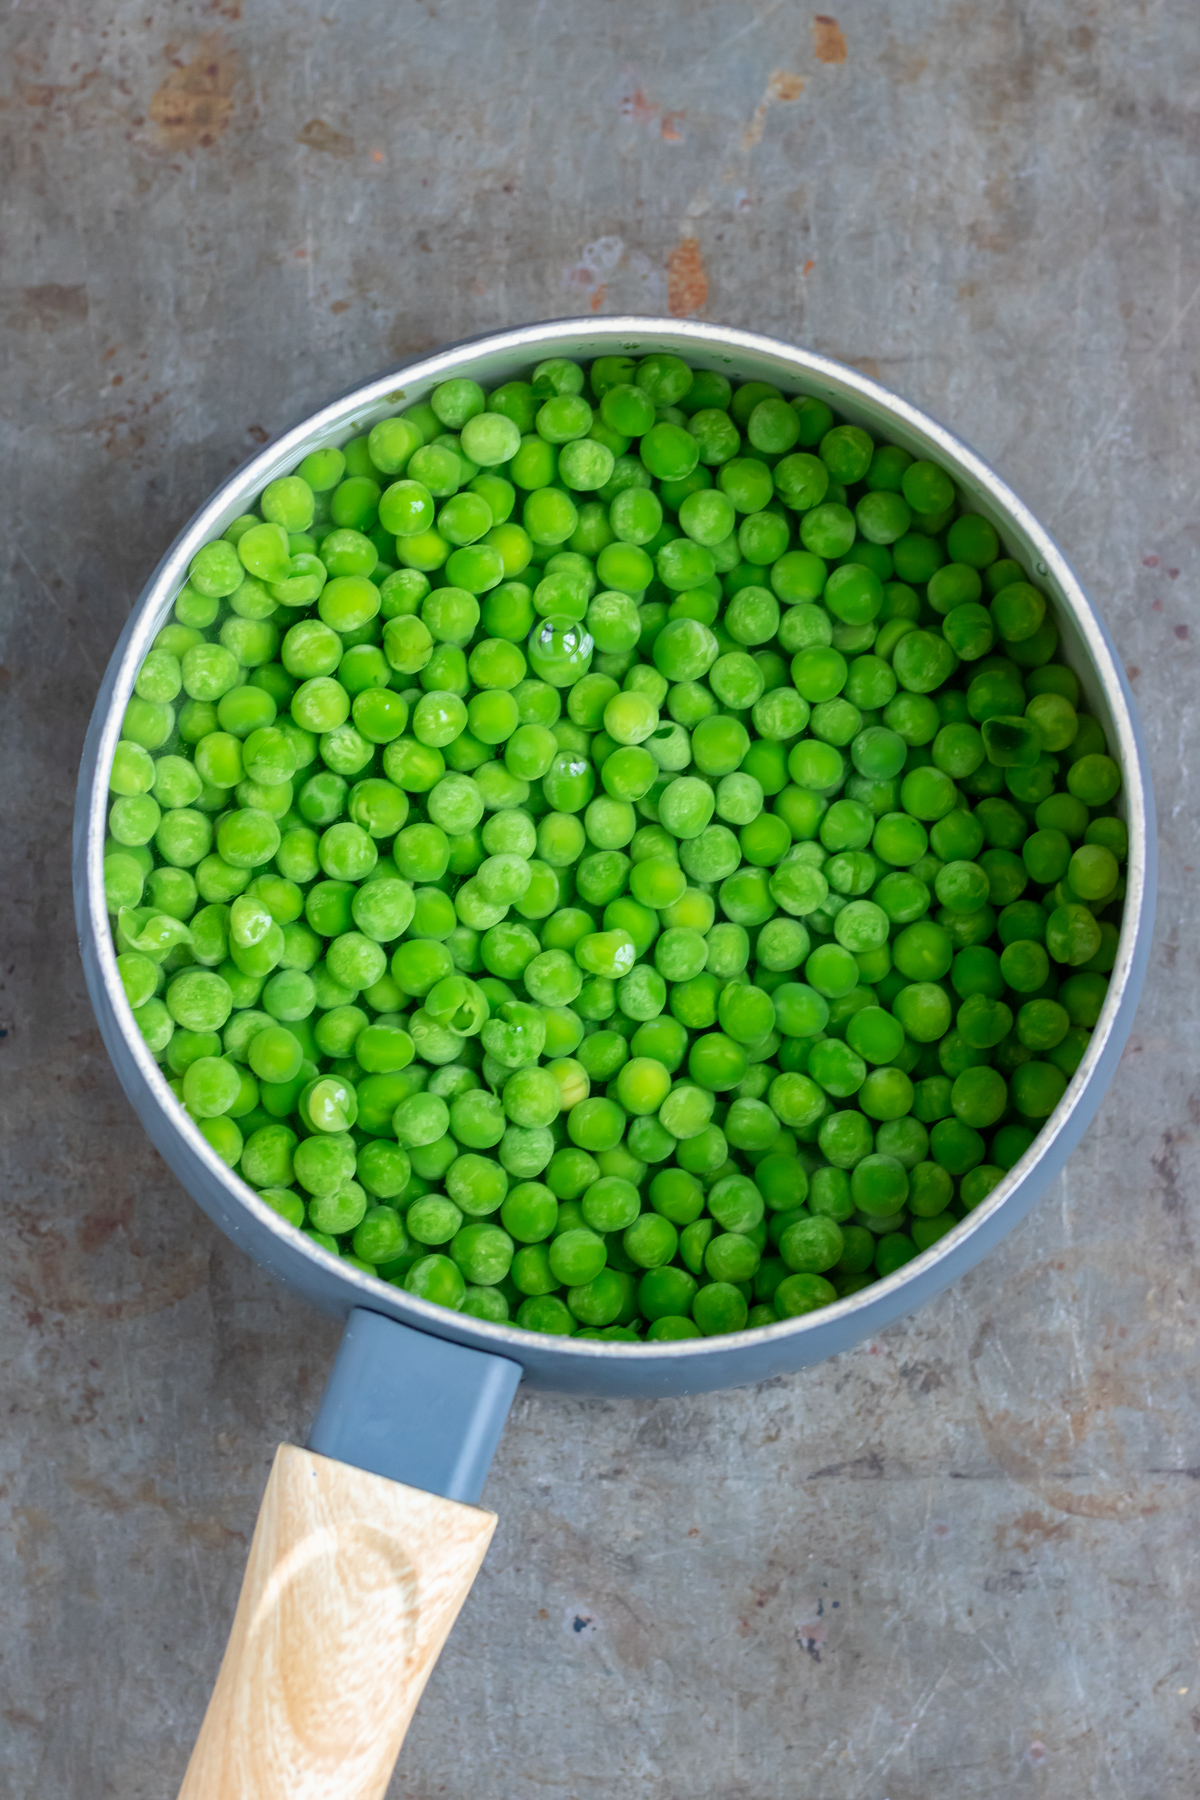 Cooking peas in a pot.